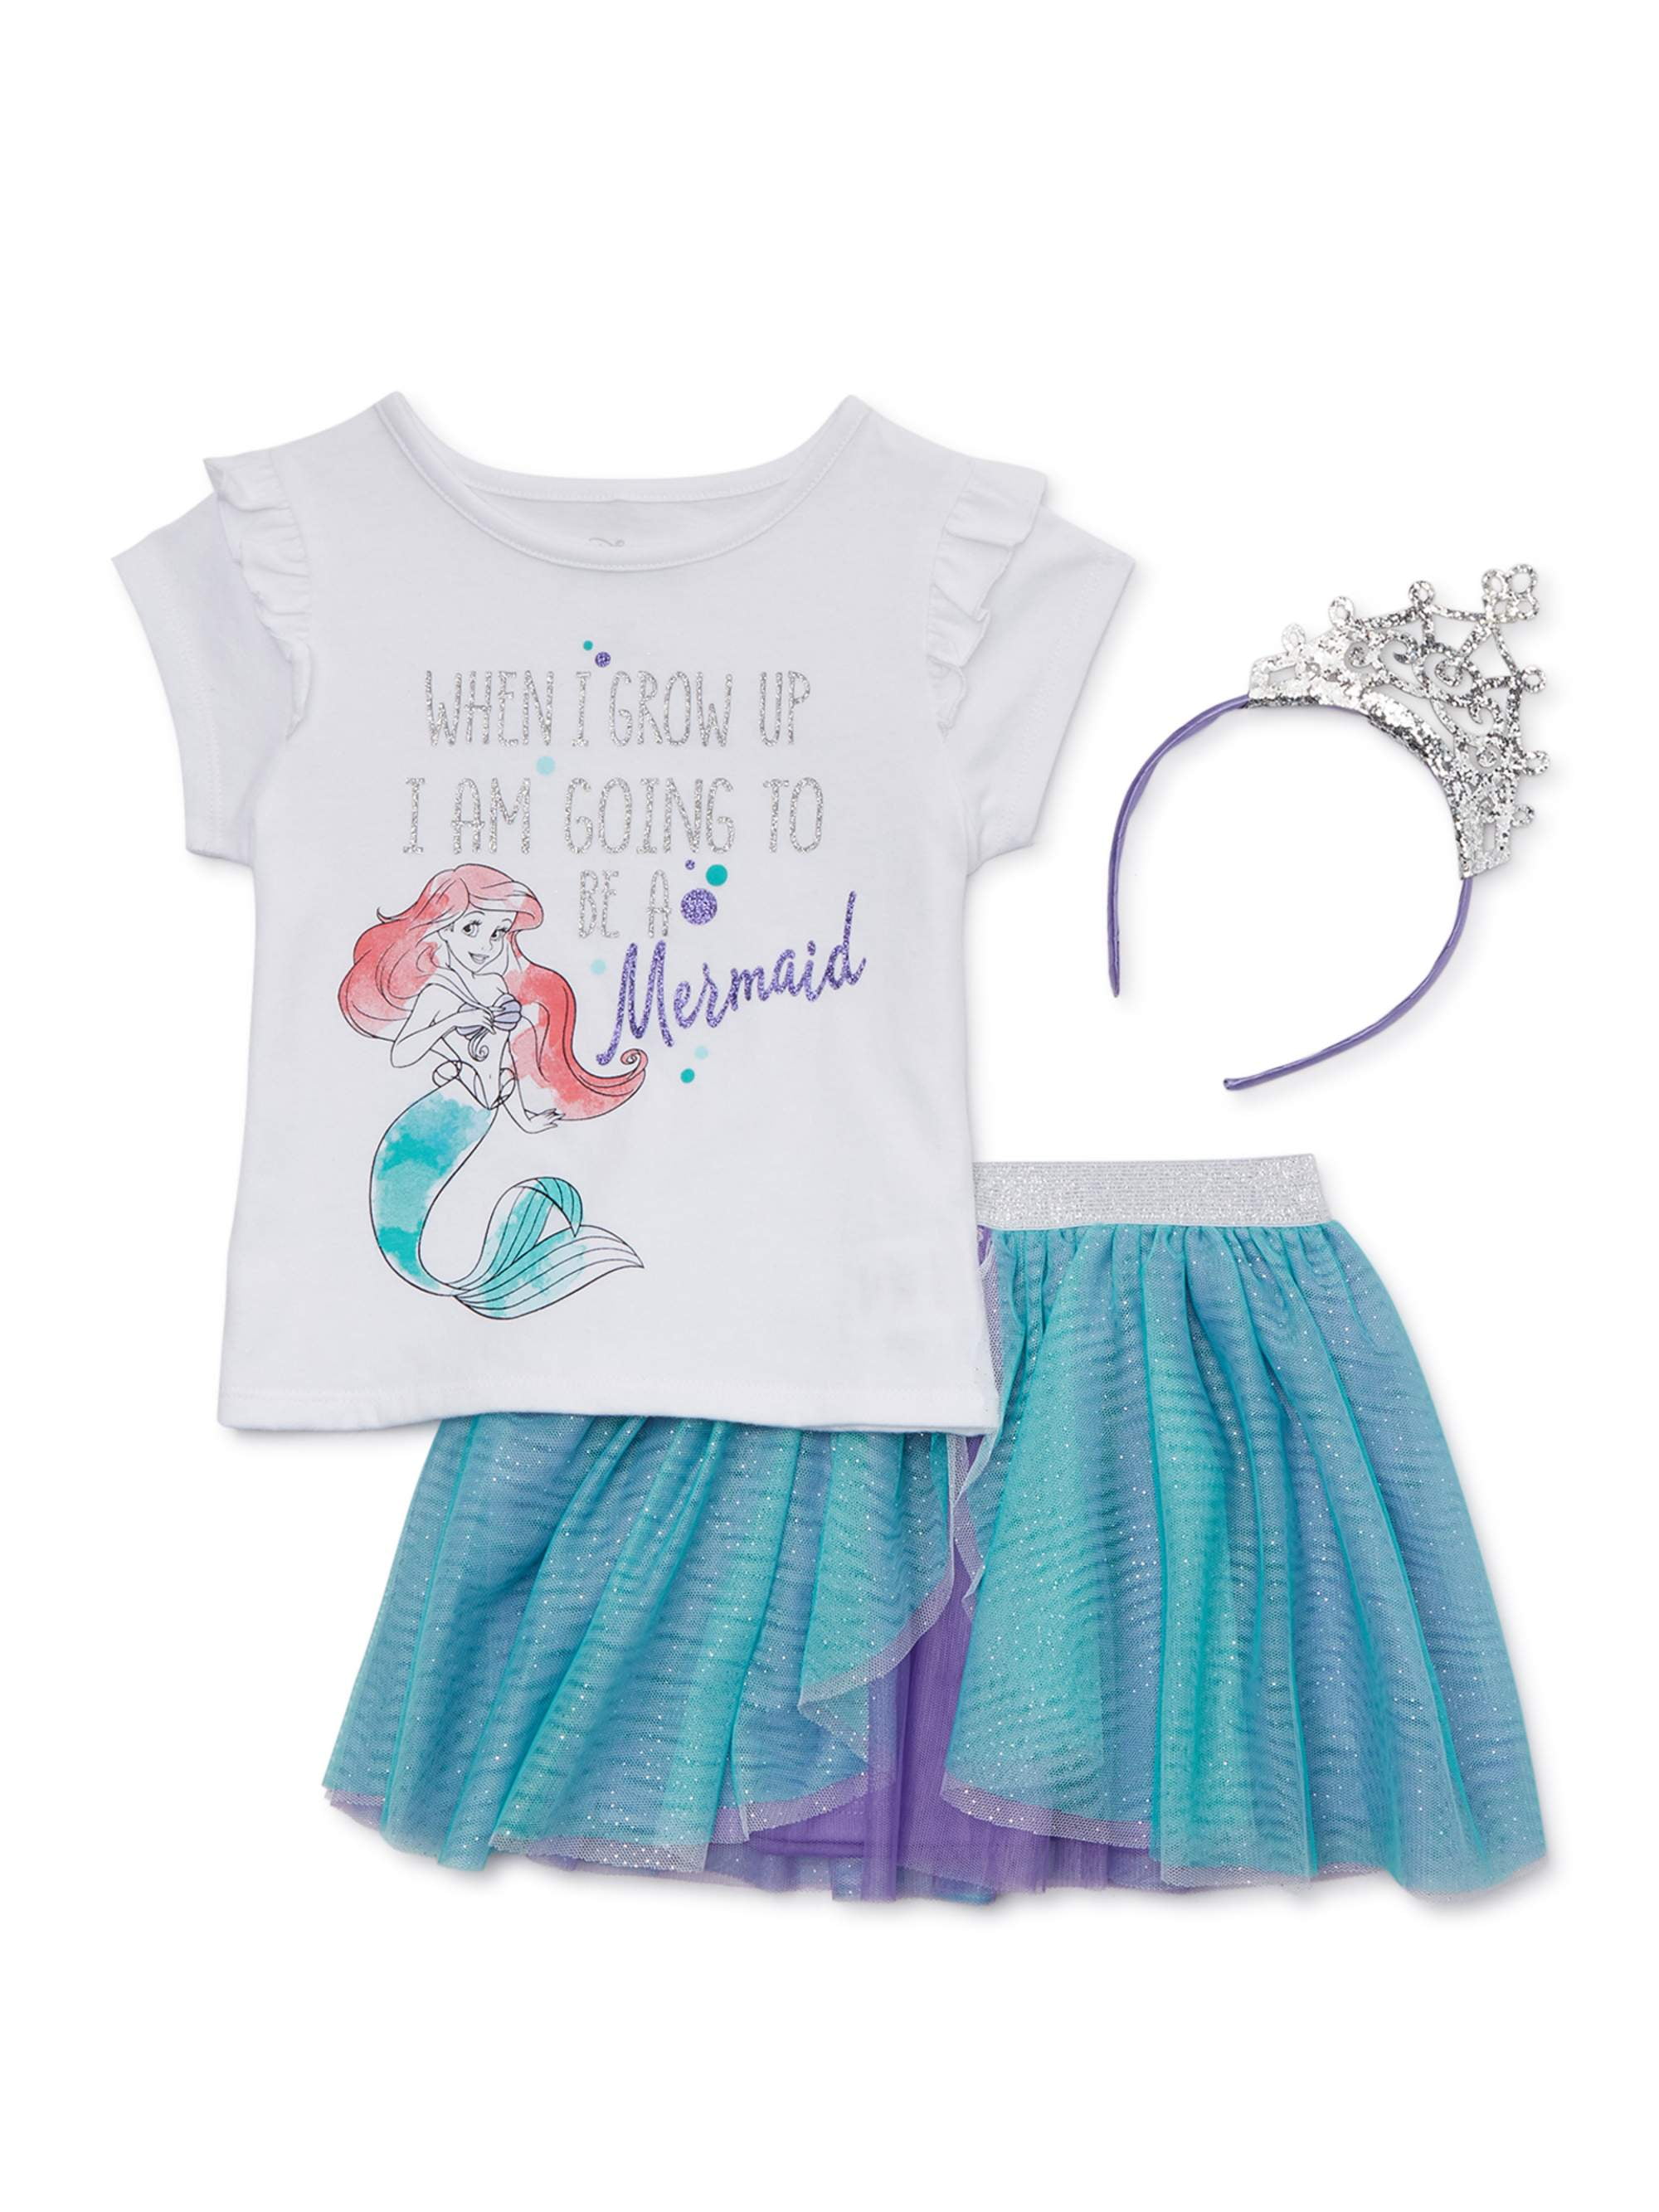 Mermaid Outfit Mermaid Shirt Mermaid Headband Hospital Outfit New Baby Gift Coming Home Outfit Baby Girl Clothes Mermaid Baby